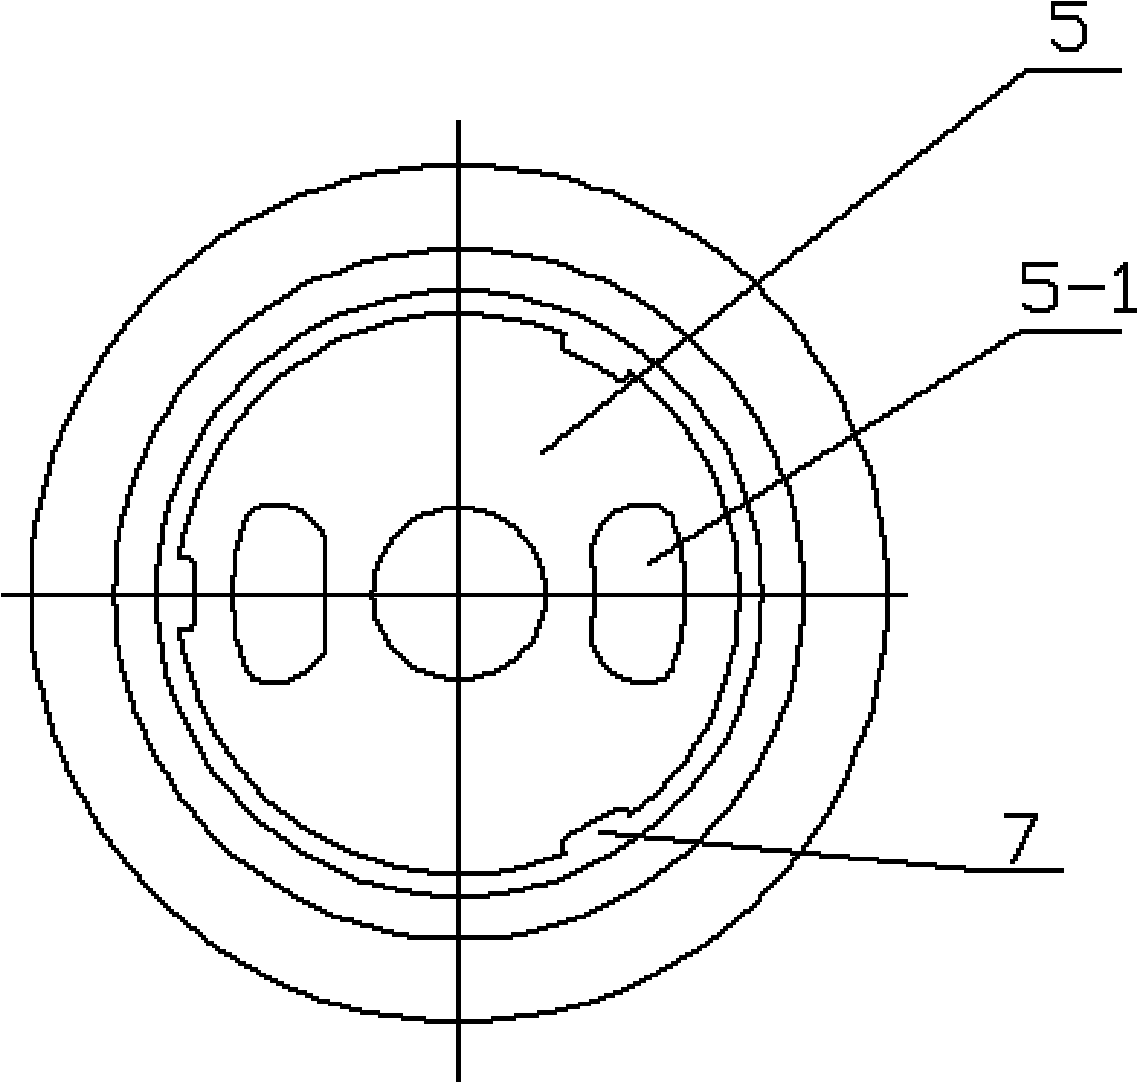 Lithium cell safety valve